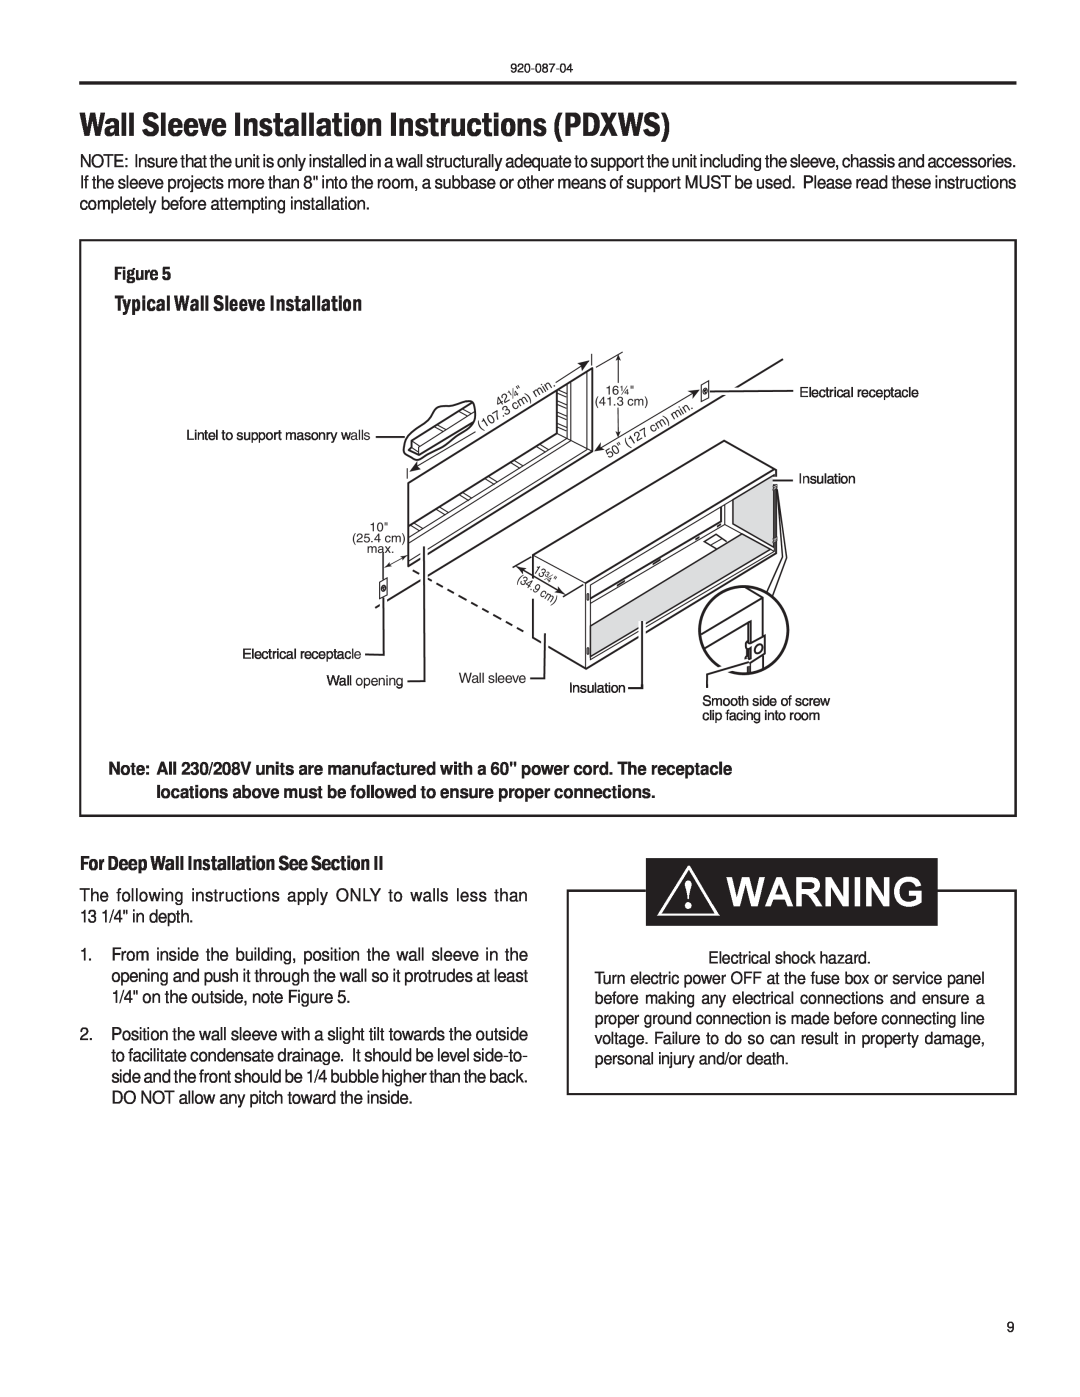 Friedrich HEAT PUMPS manual Wall Sleeve Installation Instructions PDXWS, Typical Wall Sleeve Installation 